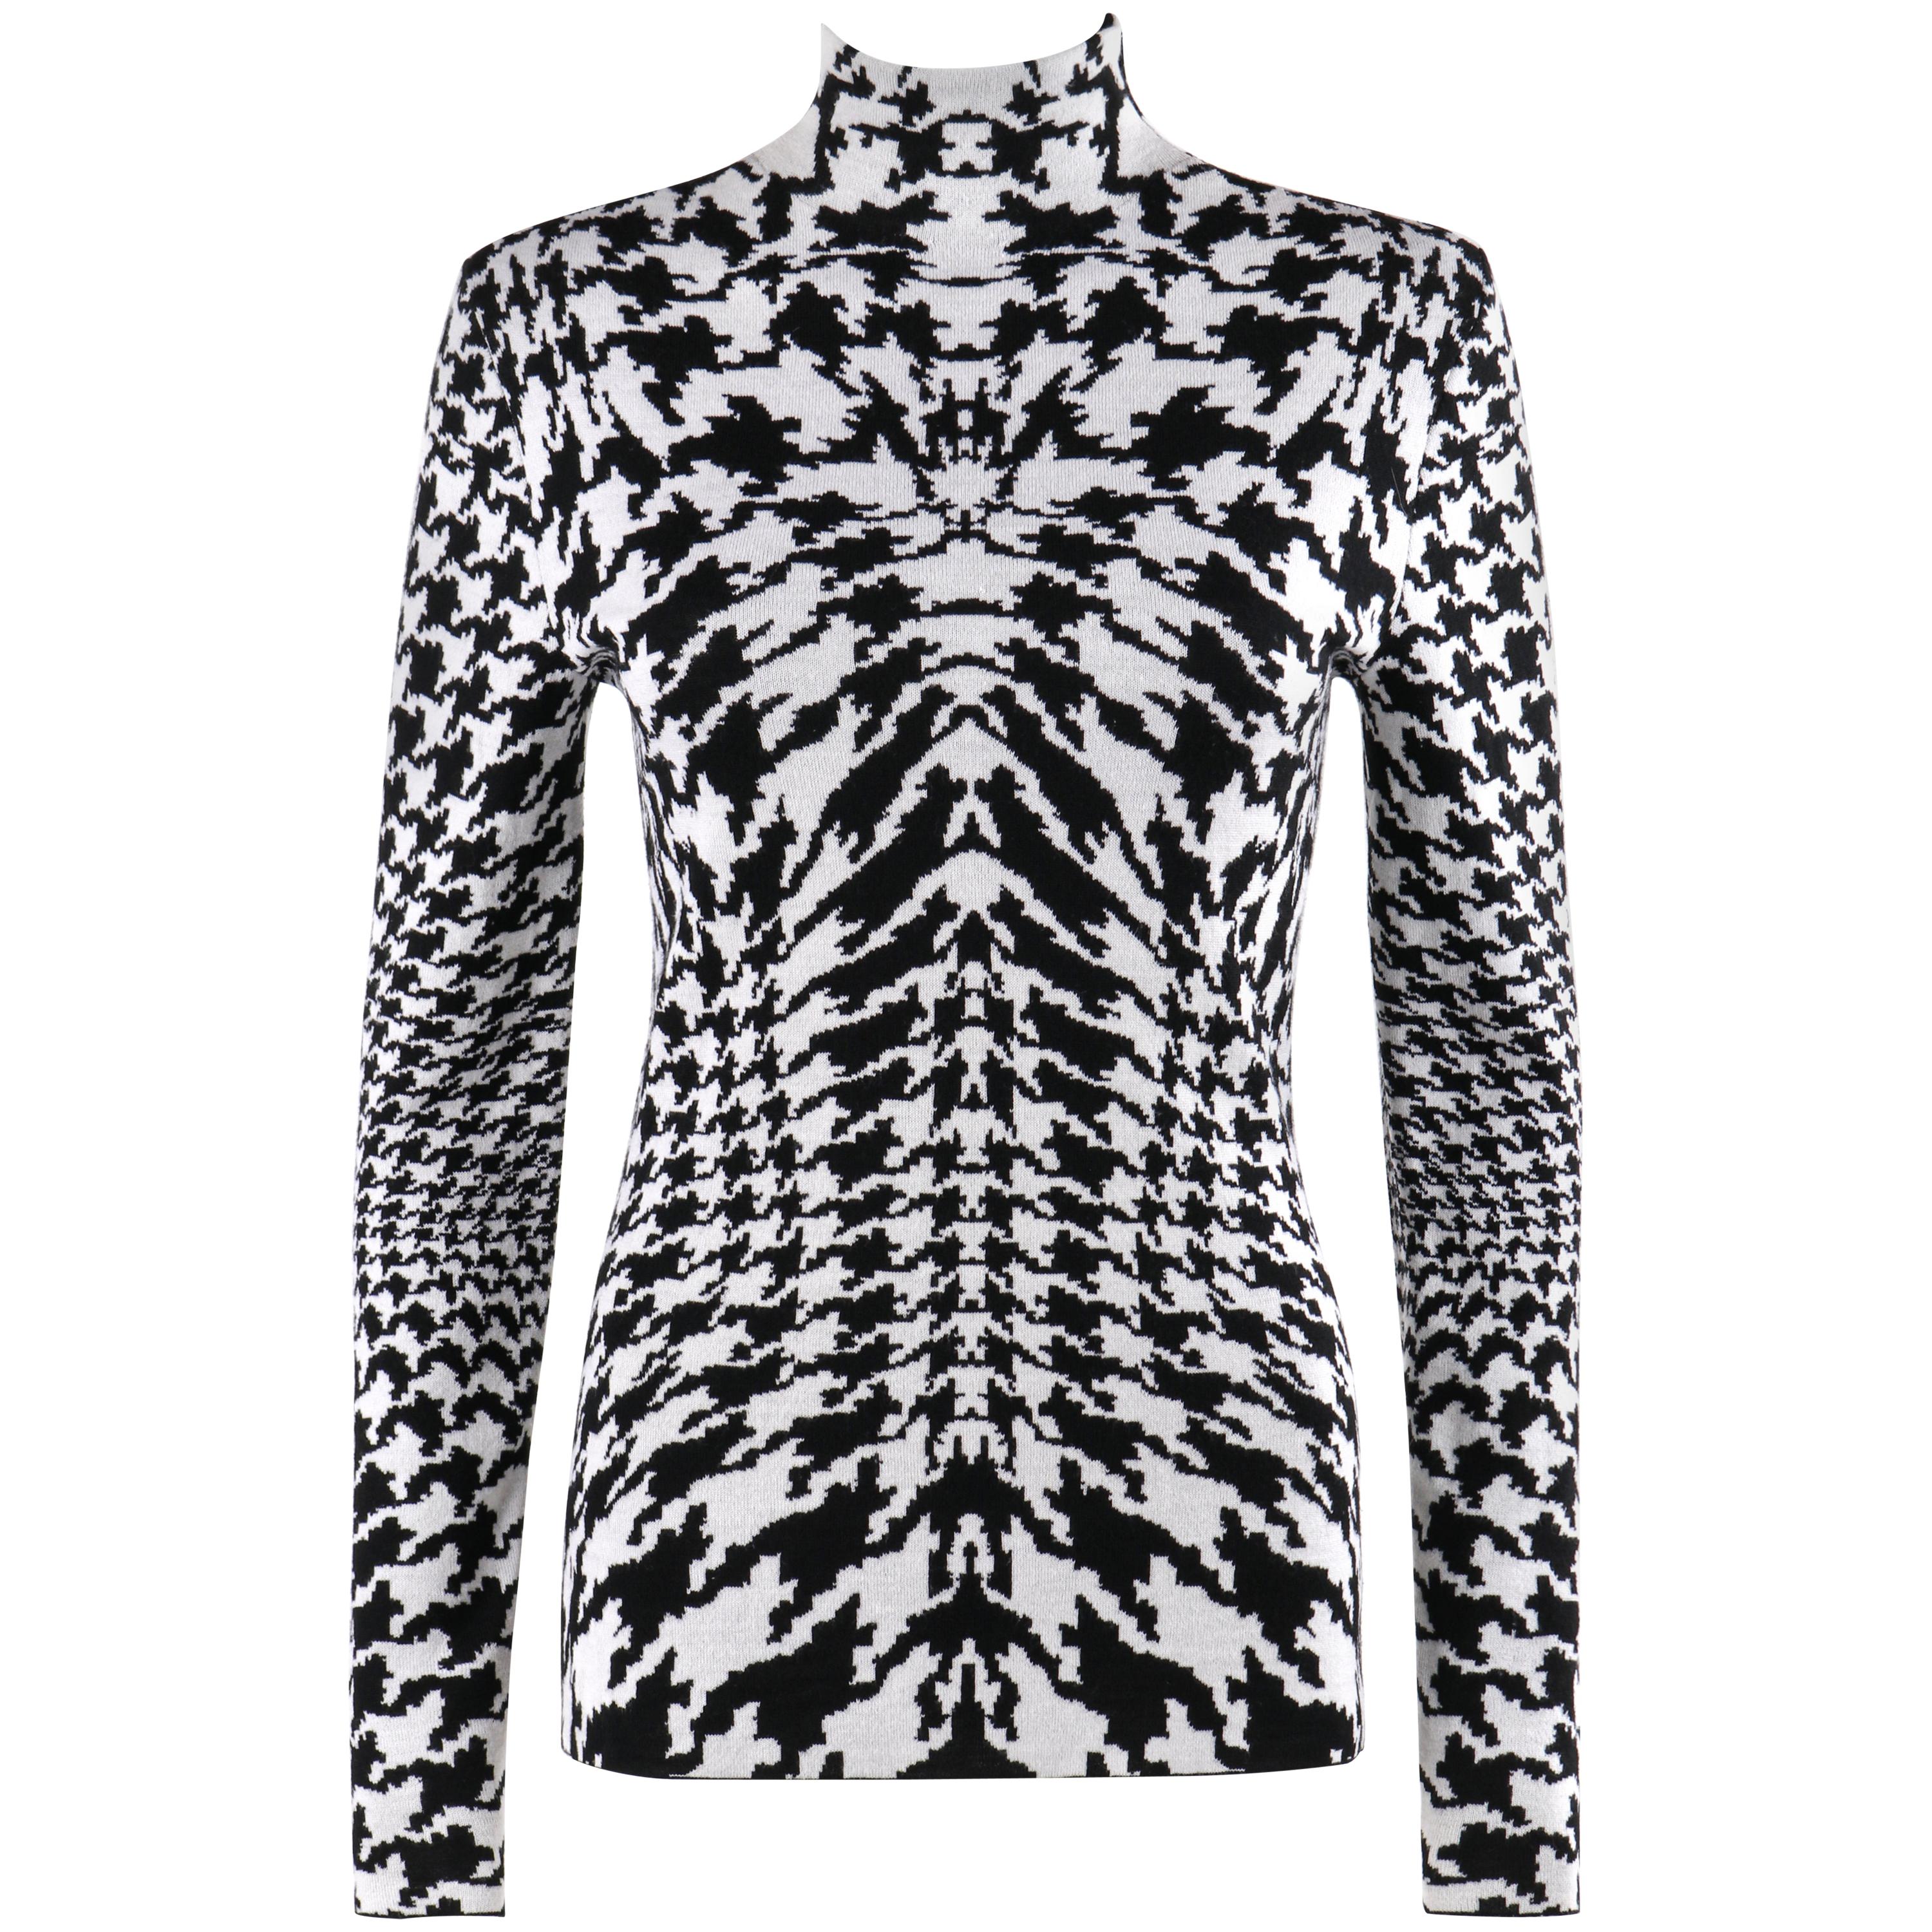 ALEXANDER McQUEEN A/W 2009 “Horn Of Plenty” Dogtooth Knit Mock Neck Sweater Top For Sale